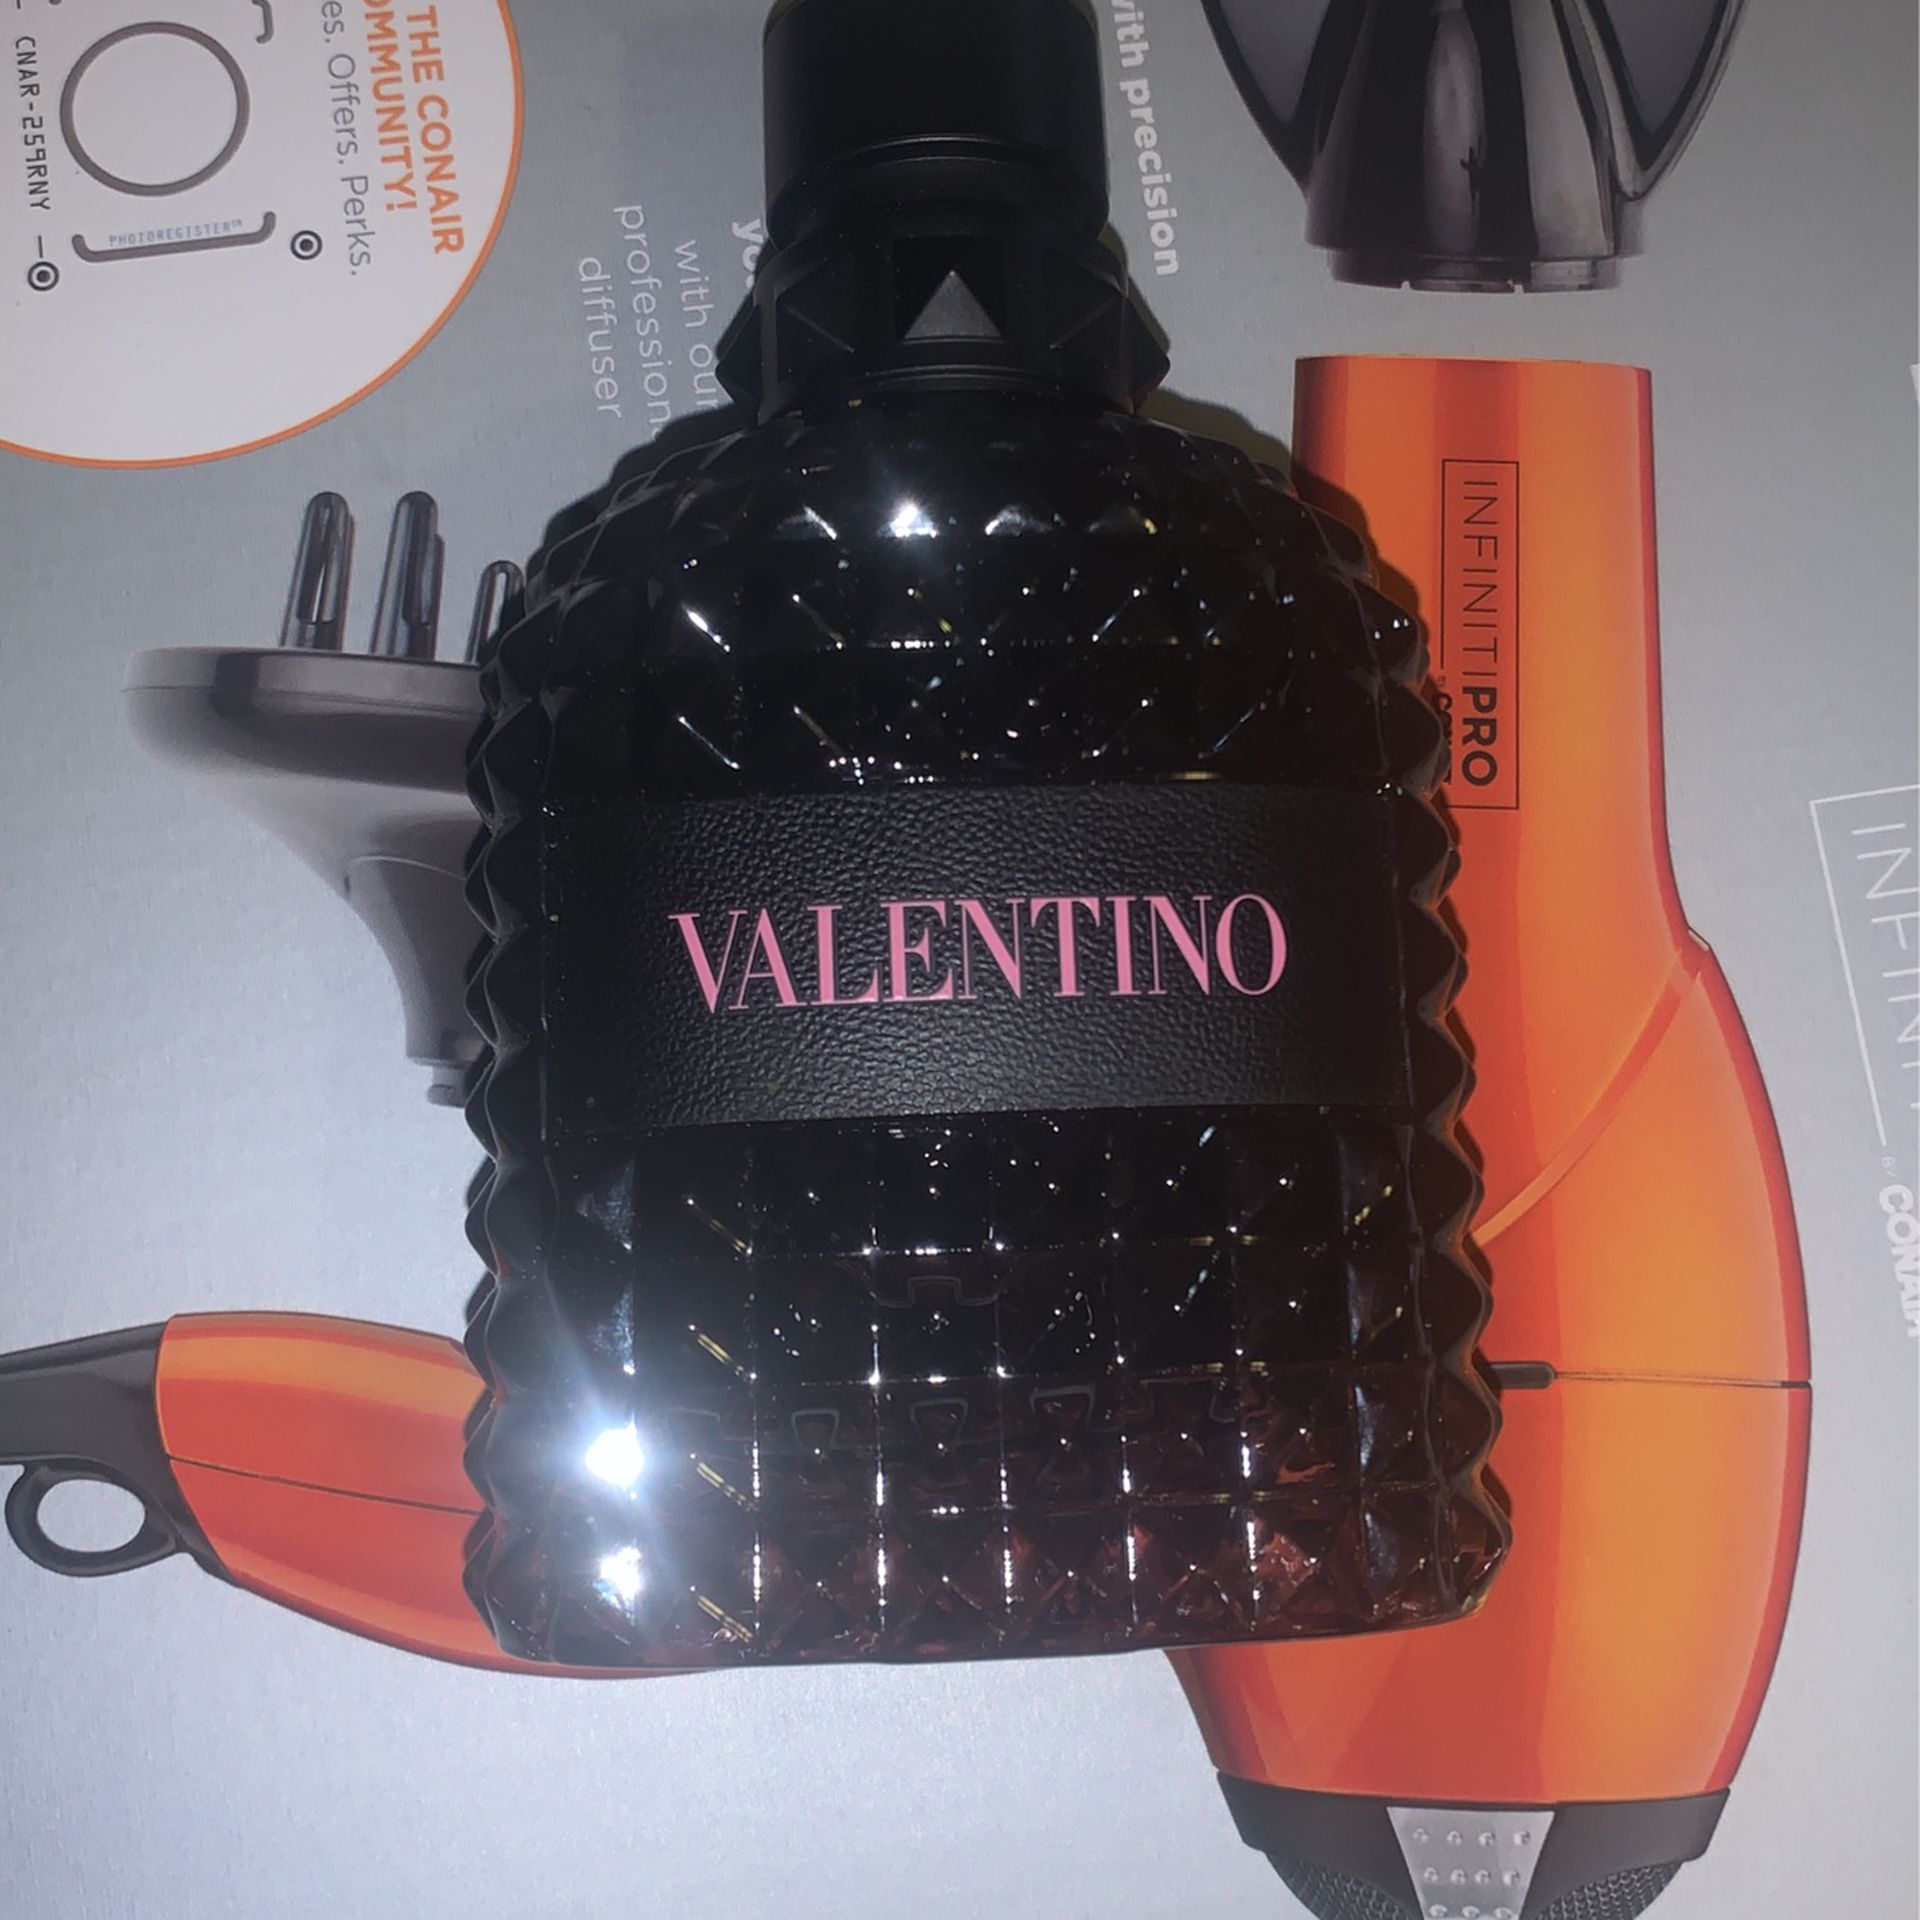 Valentino Perfume for Sale in Bronx, NY - OfferUp